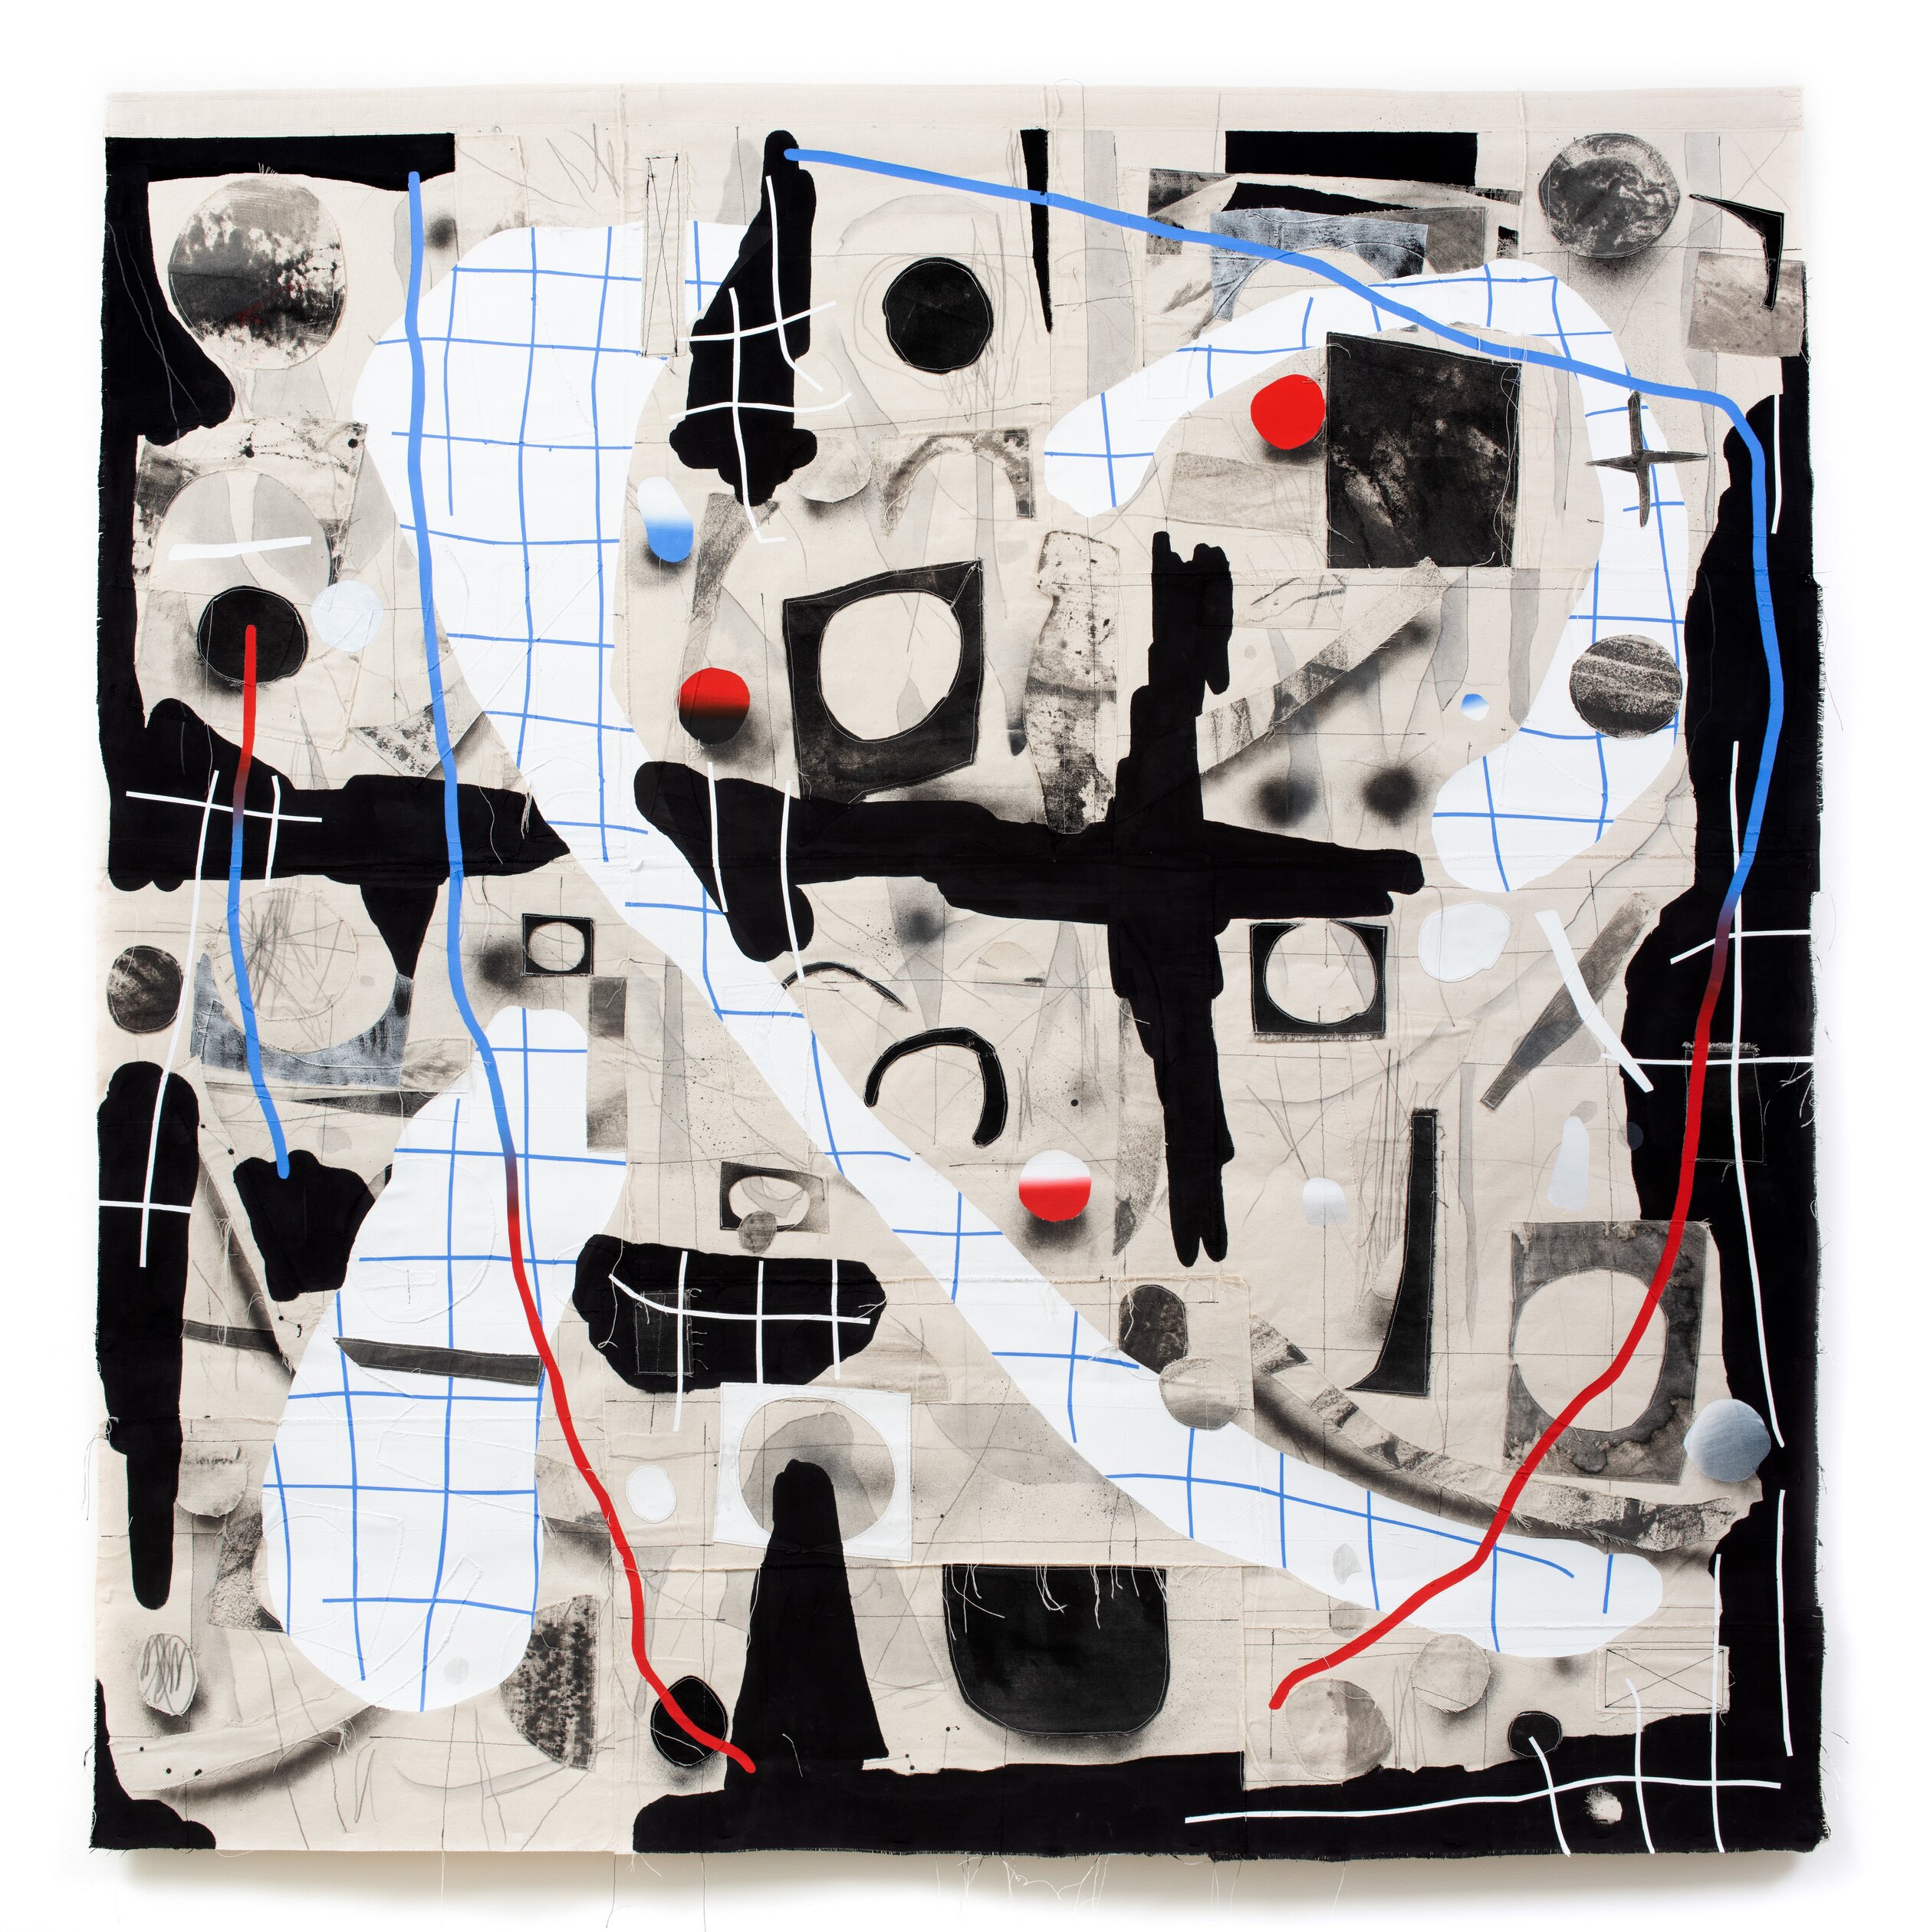   Multiverse I , 2020 Flashe, acrylic, graphite, thread, and canvas on canvas 74 x 72 x 2 inches 